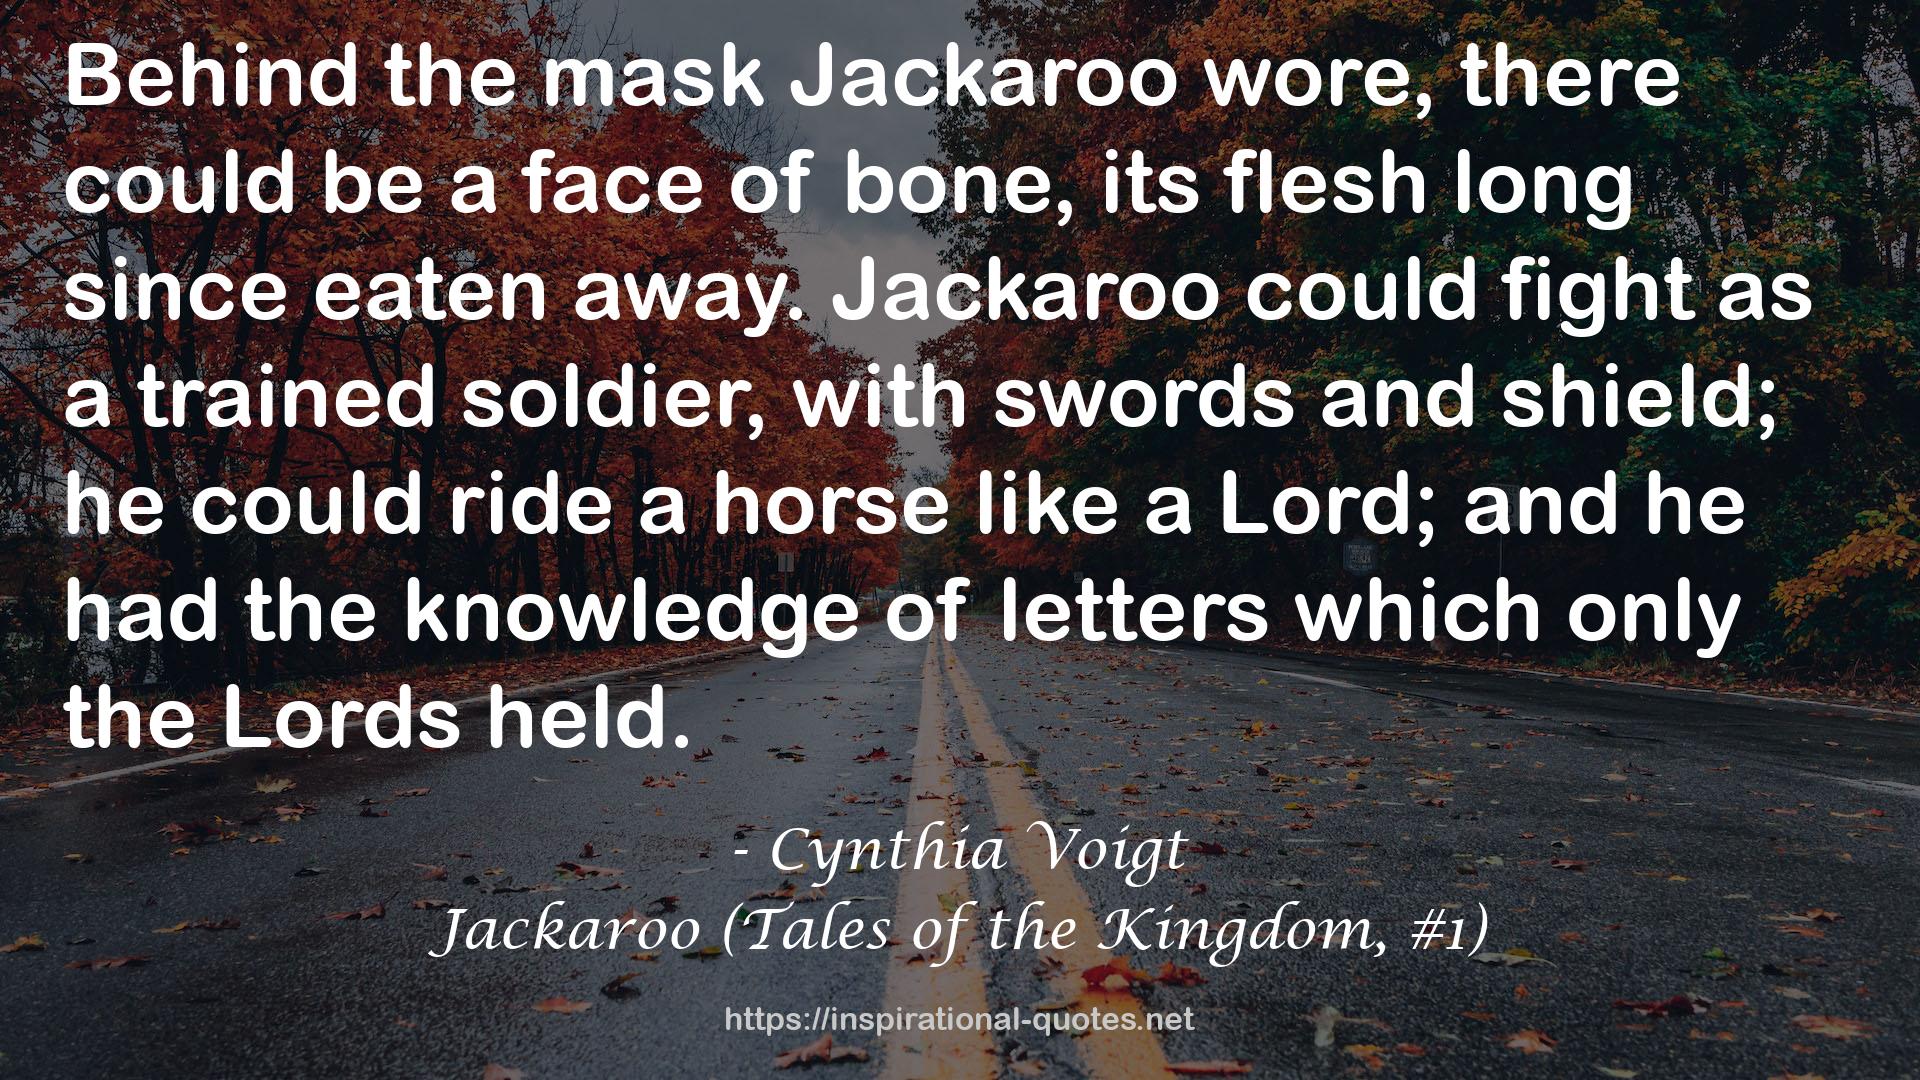 Jackaroo (Tales of the Kingdom, #1) QUOTES